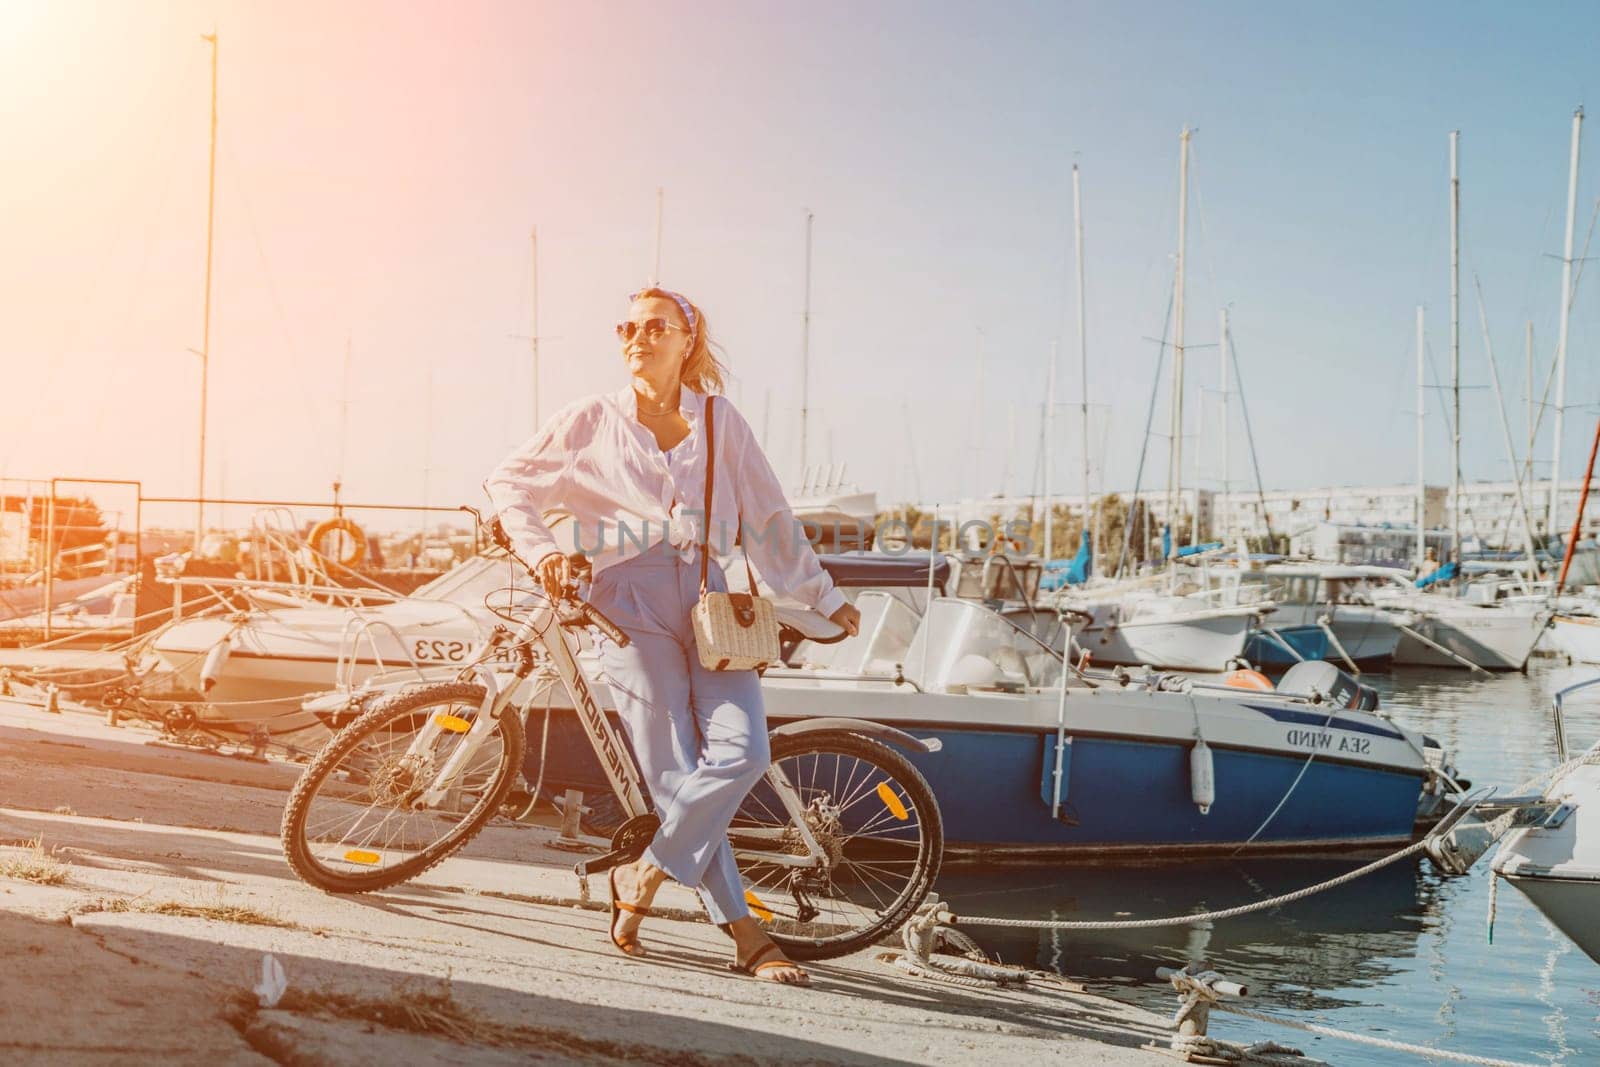 Woman enjoys bike ride along waterfront, Marina surroundings. She is wearing a white shirt and blue jeans, and she has a handbag with her. Capturing outdoor bike ride by waterfront. by Matiunina